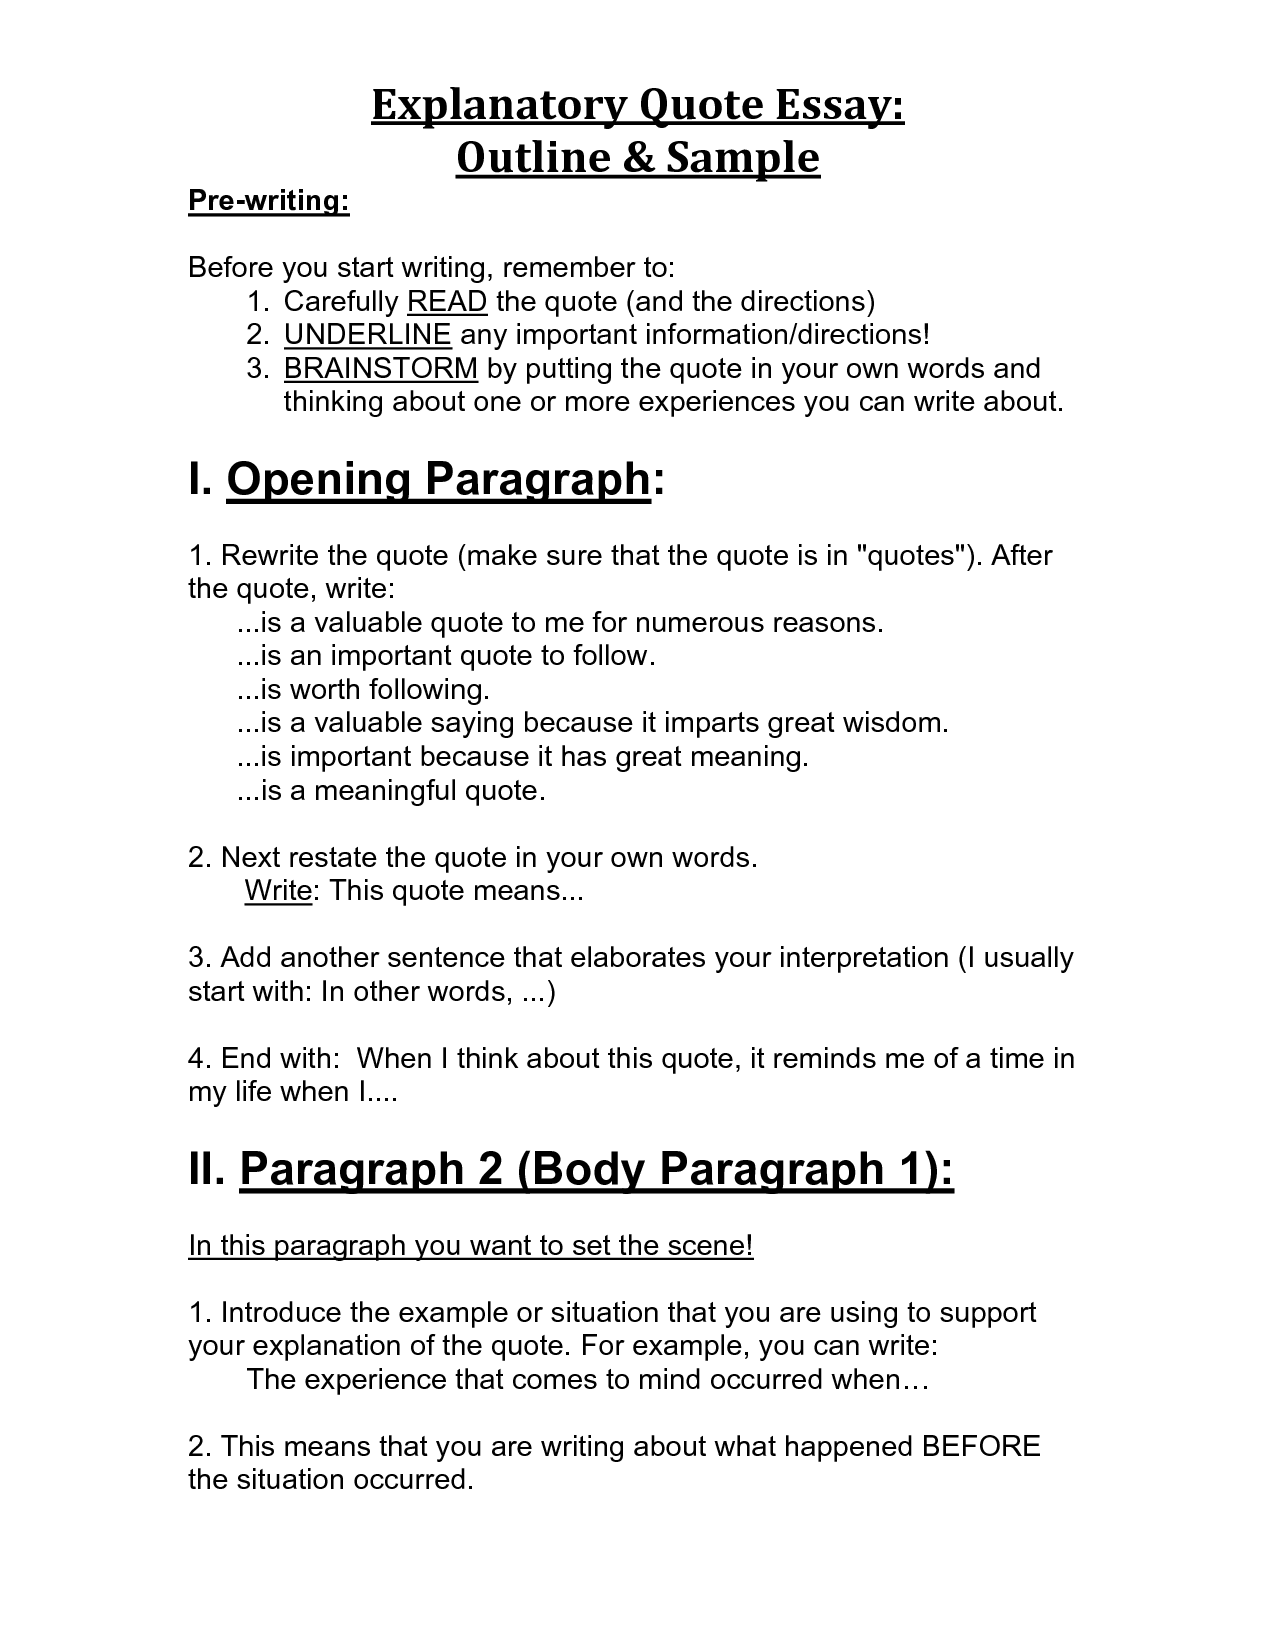 20 Paragraph Essay Example On Quotes. QuotesGram